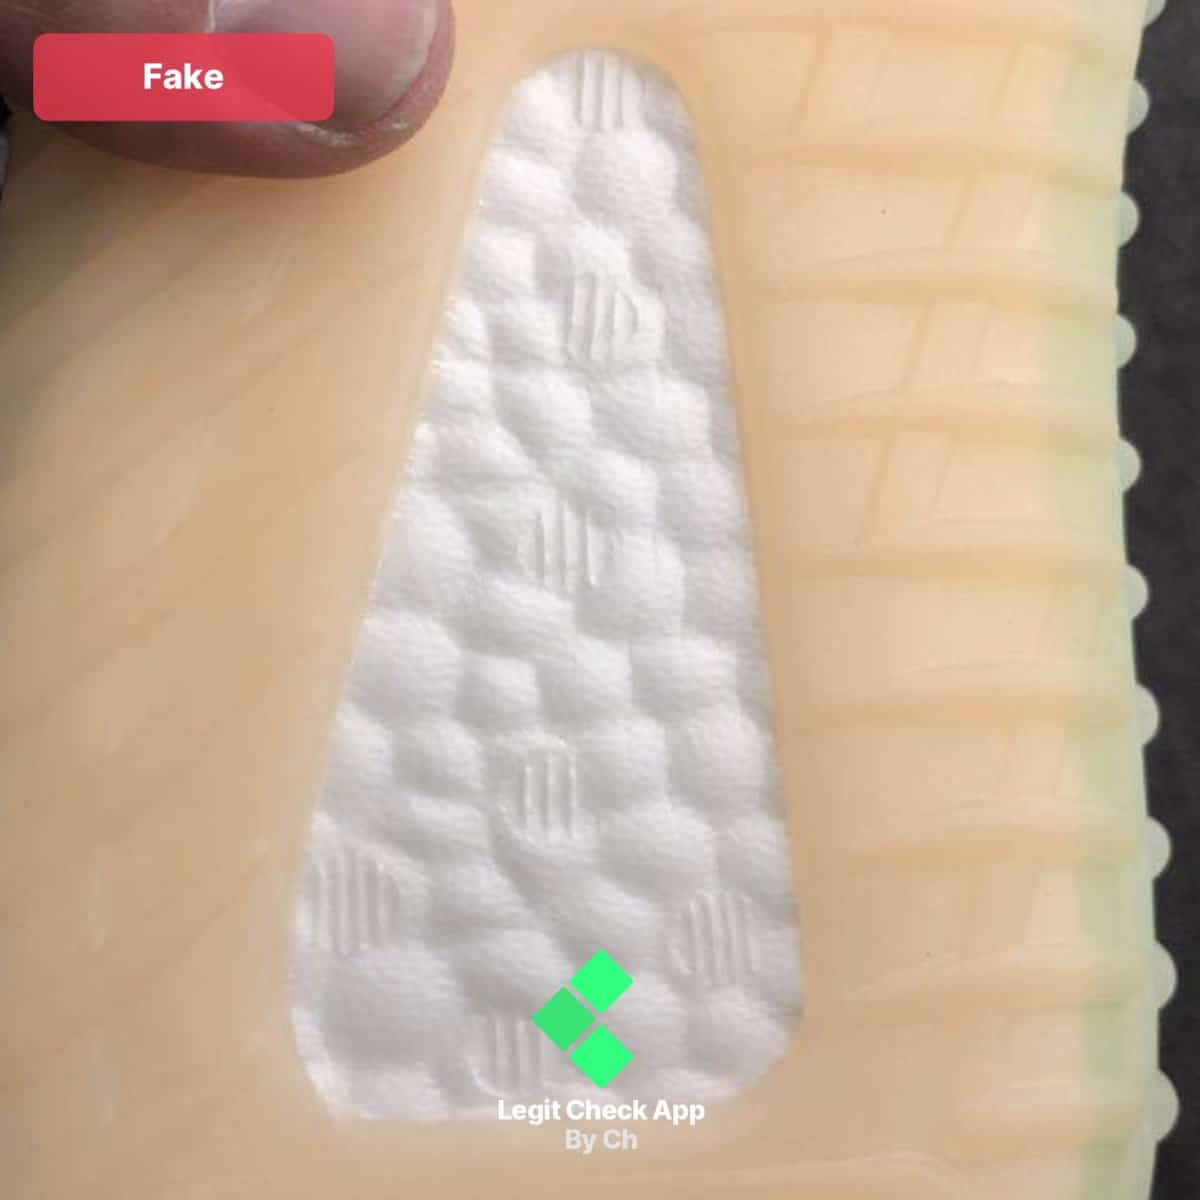 fake or real yeezy